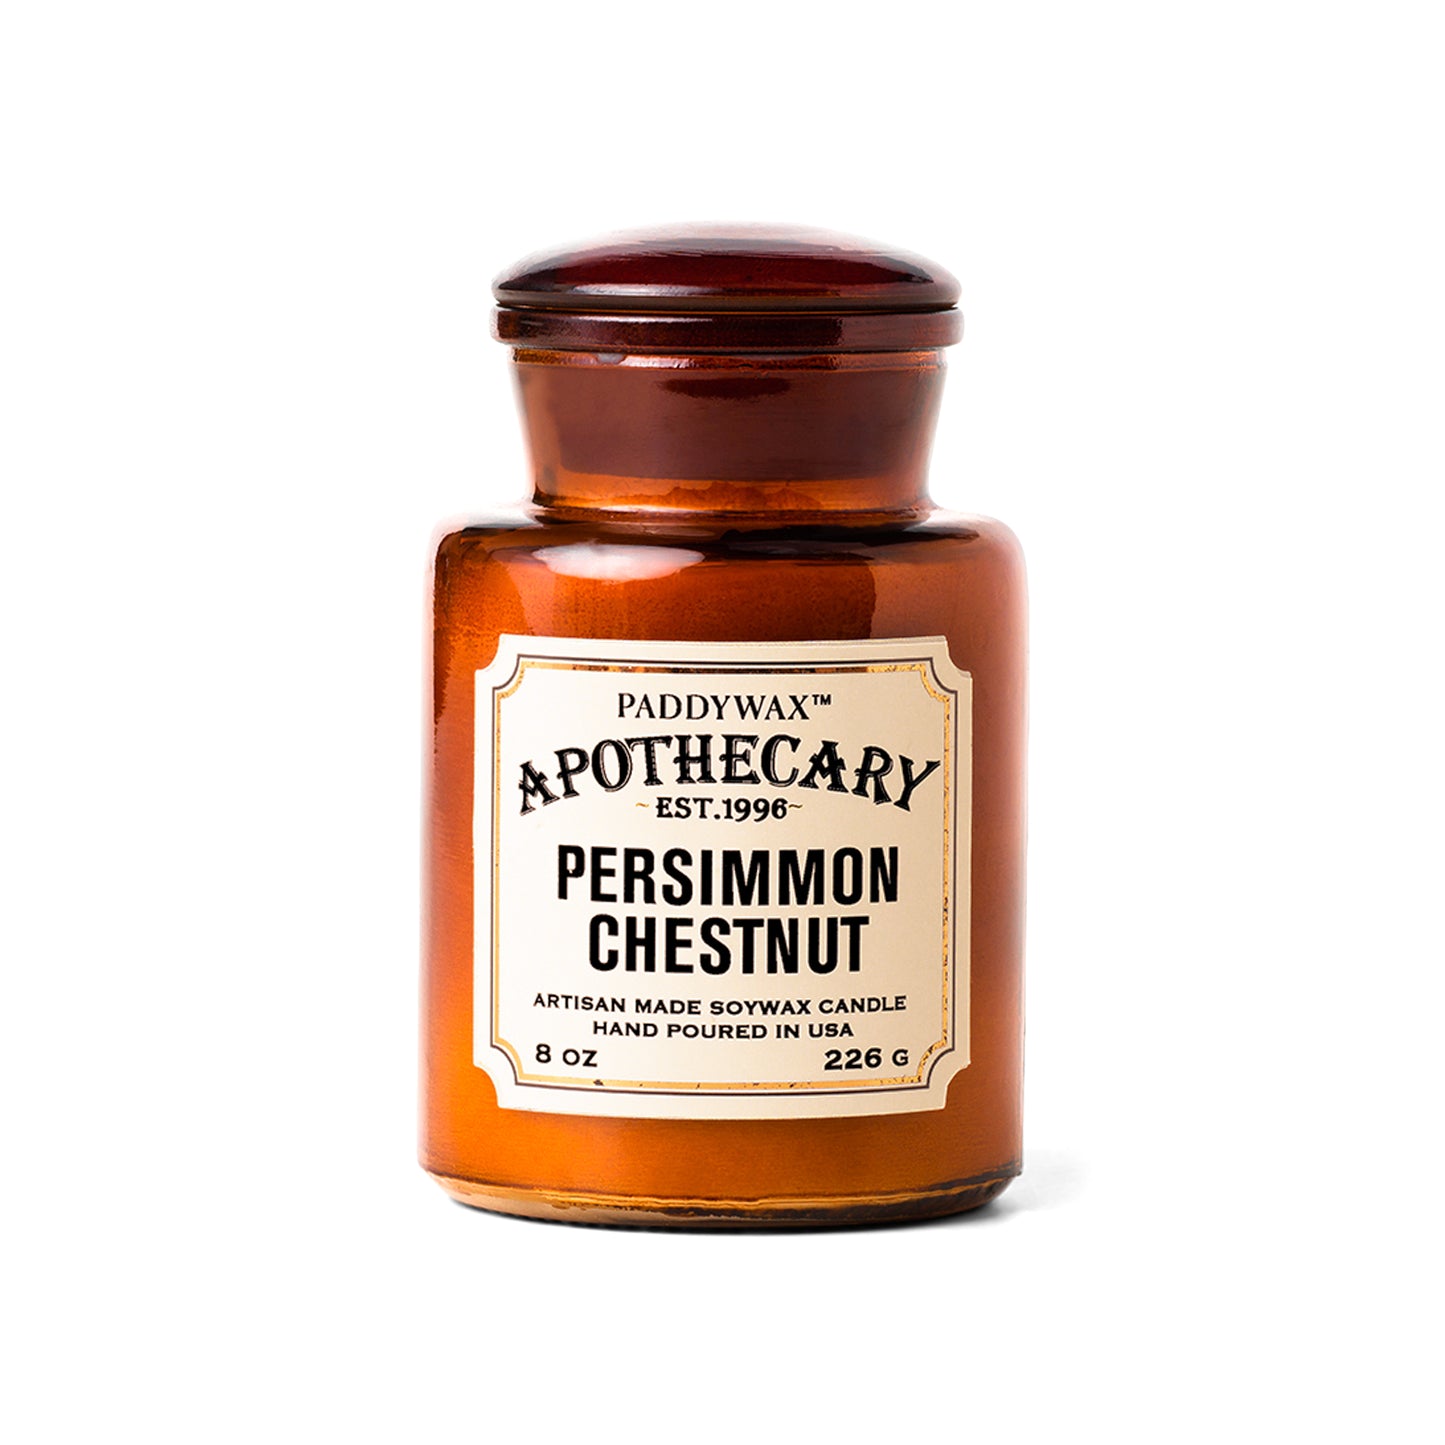 8 oz dark brown apothecary bottle glass vessel with a vintage-style label; white wax; part of the apothecary collection